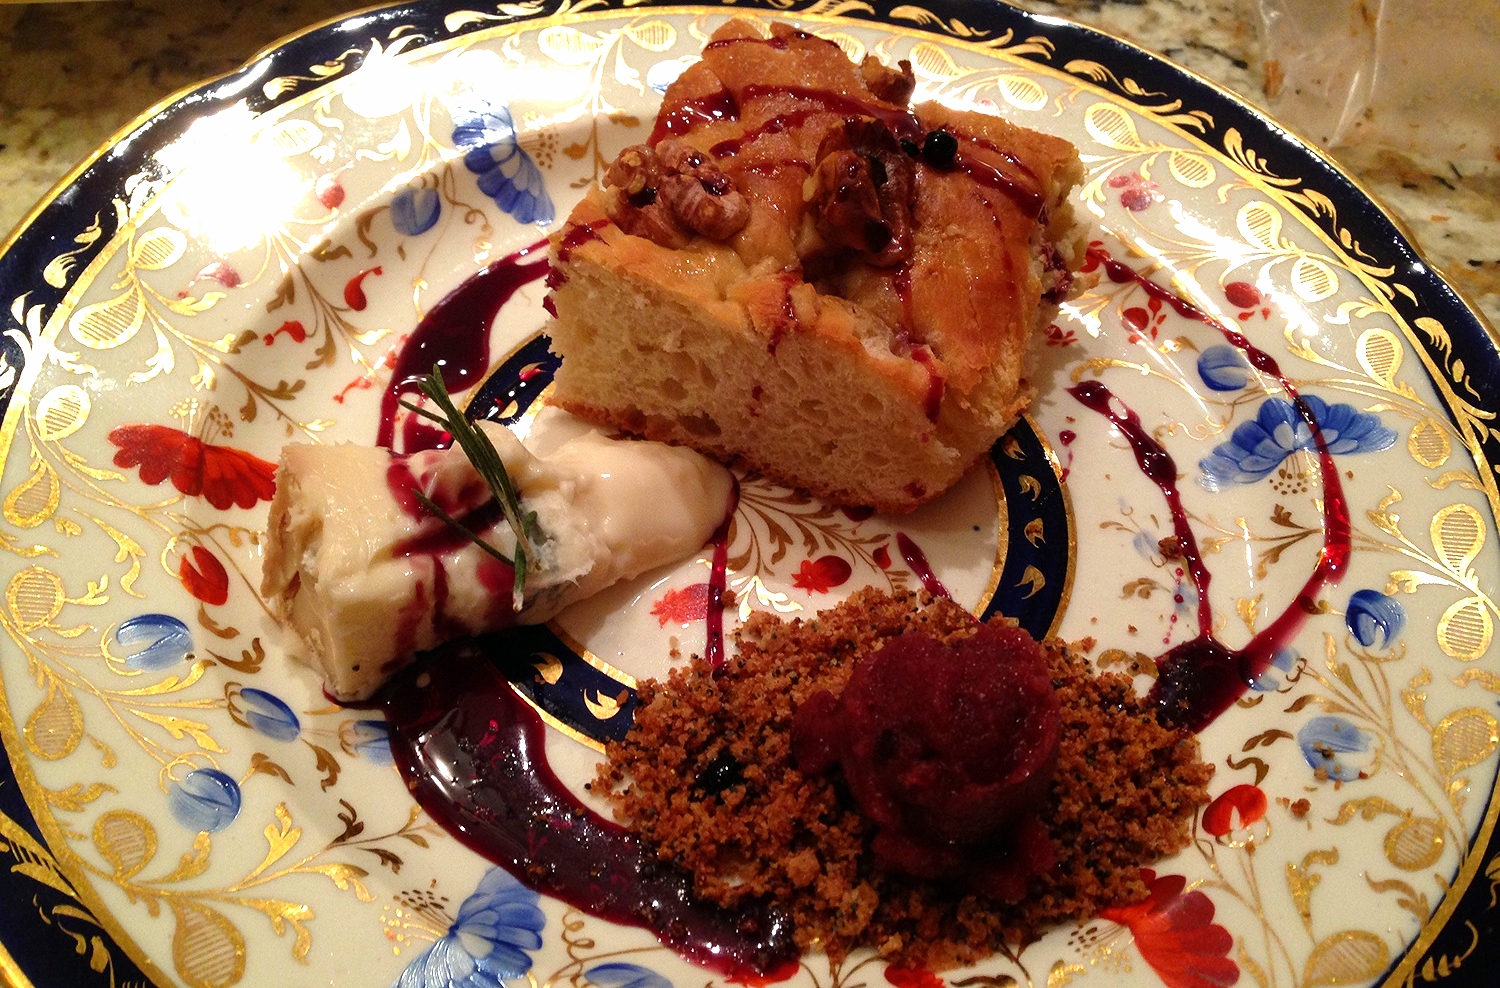 Rosemary-pecan focaccia, concord grape sorbetto on gingersnap crumble, gorgonzola dolce, spiced red wine sauce